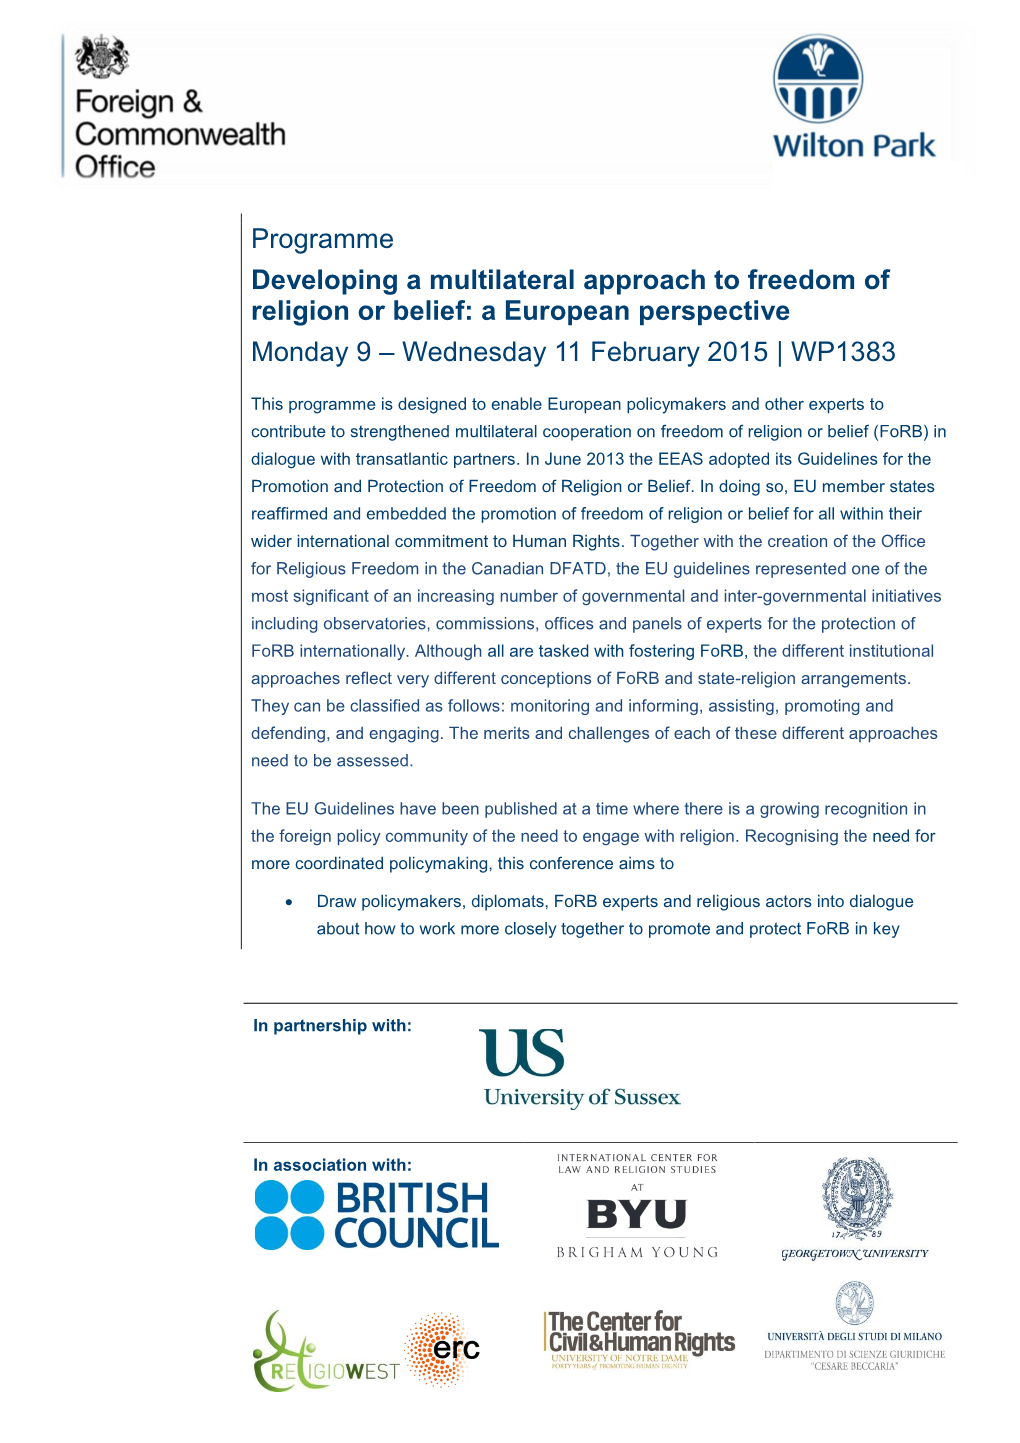 Programme Developing a Multilateral Approach to Freedom of Religion Or Belief: a European Perspective Monday 9 – Wednesday 11 February 2015 | WP1383